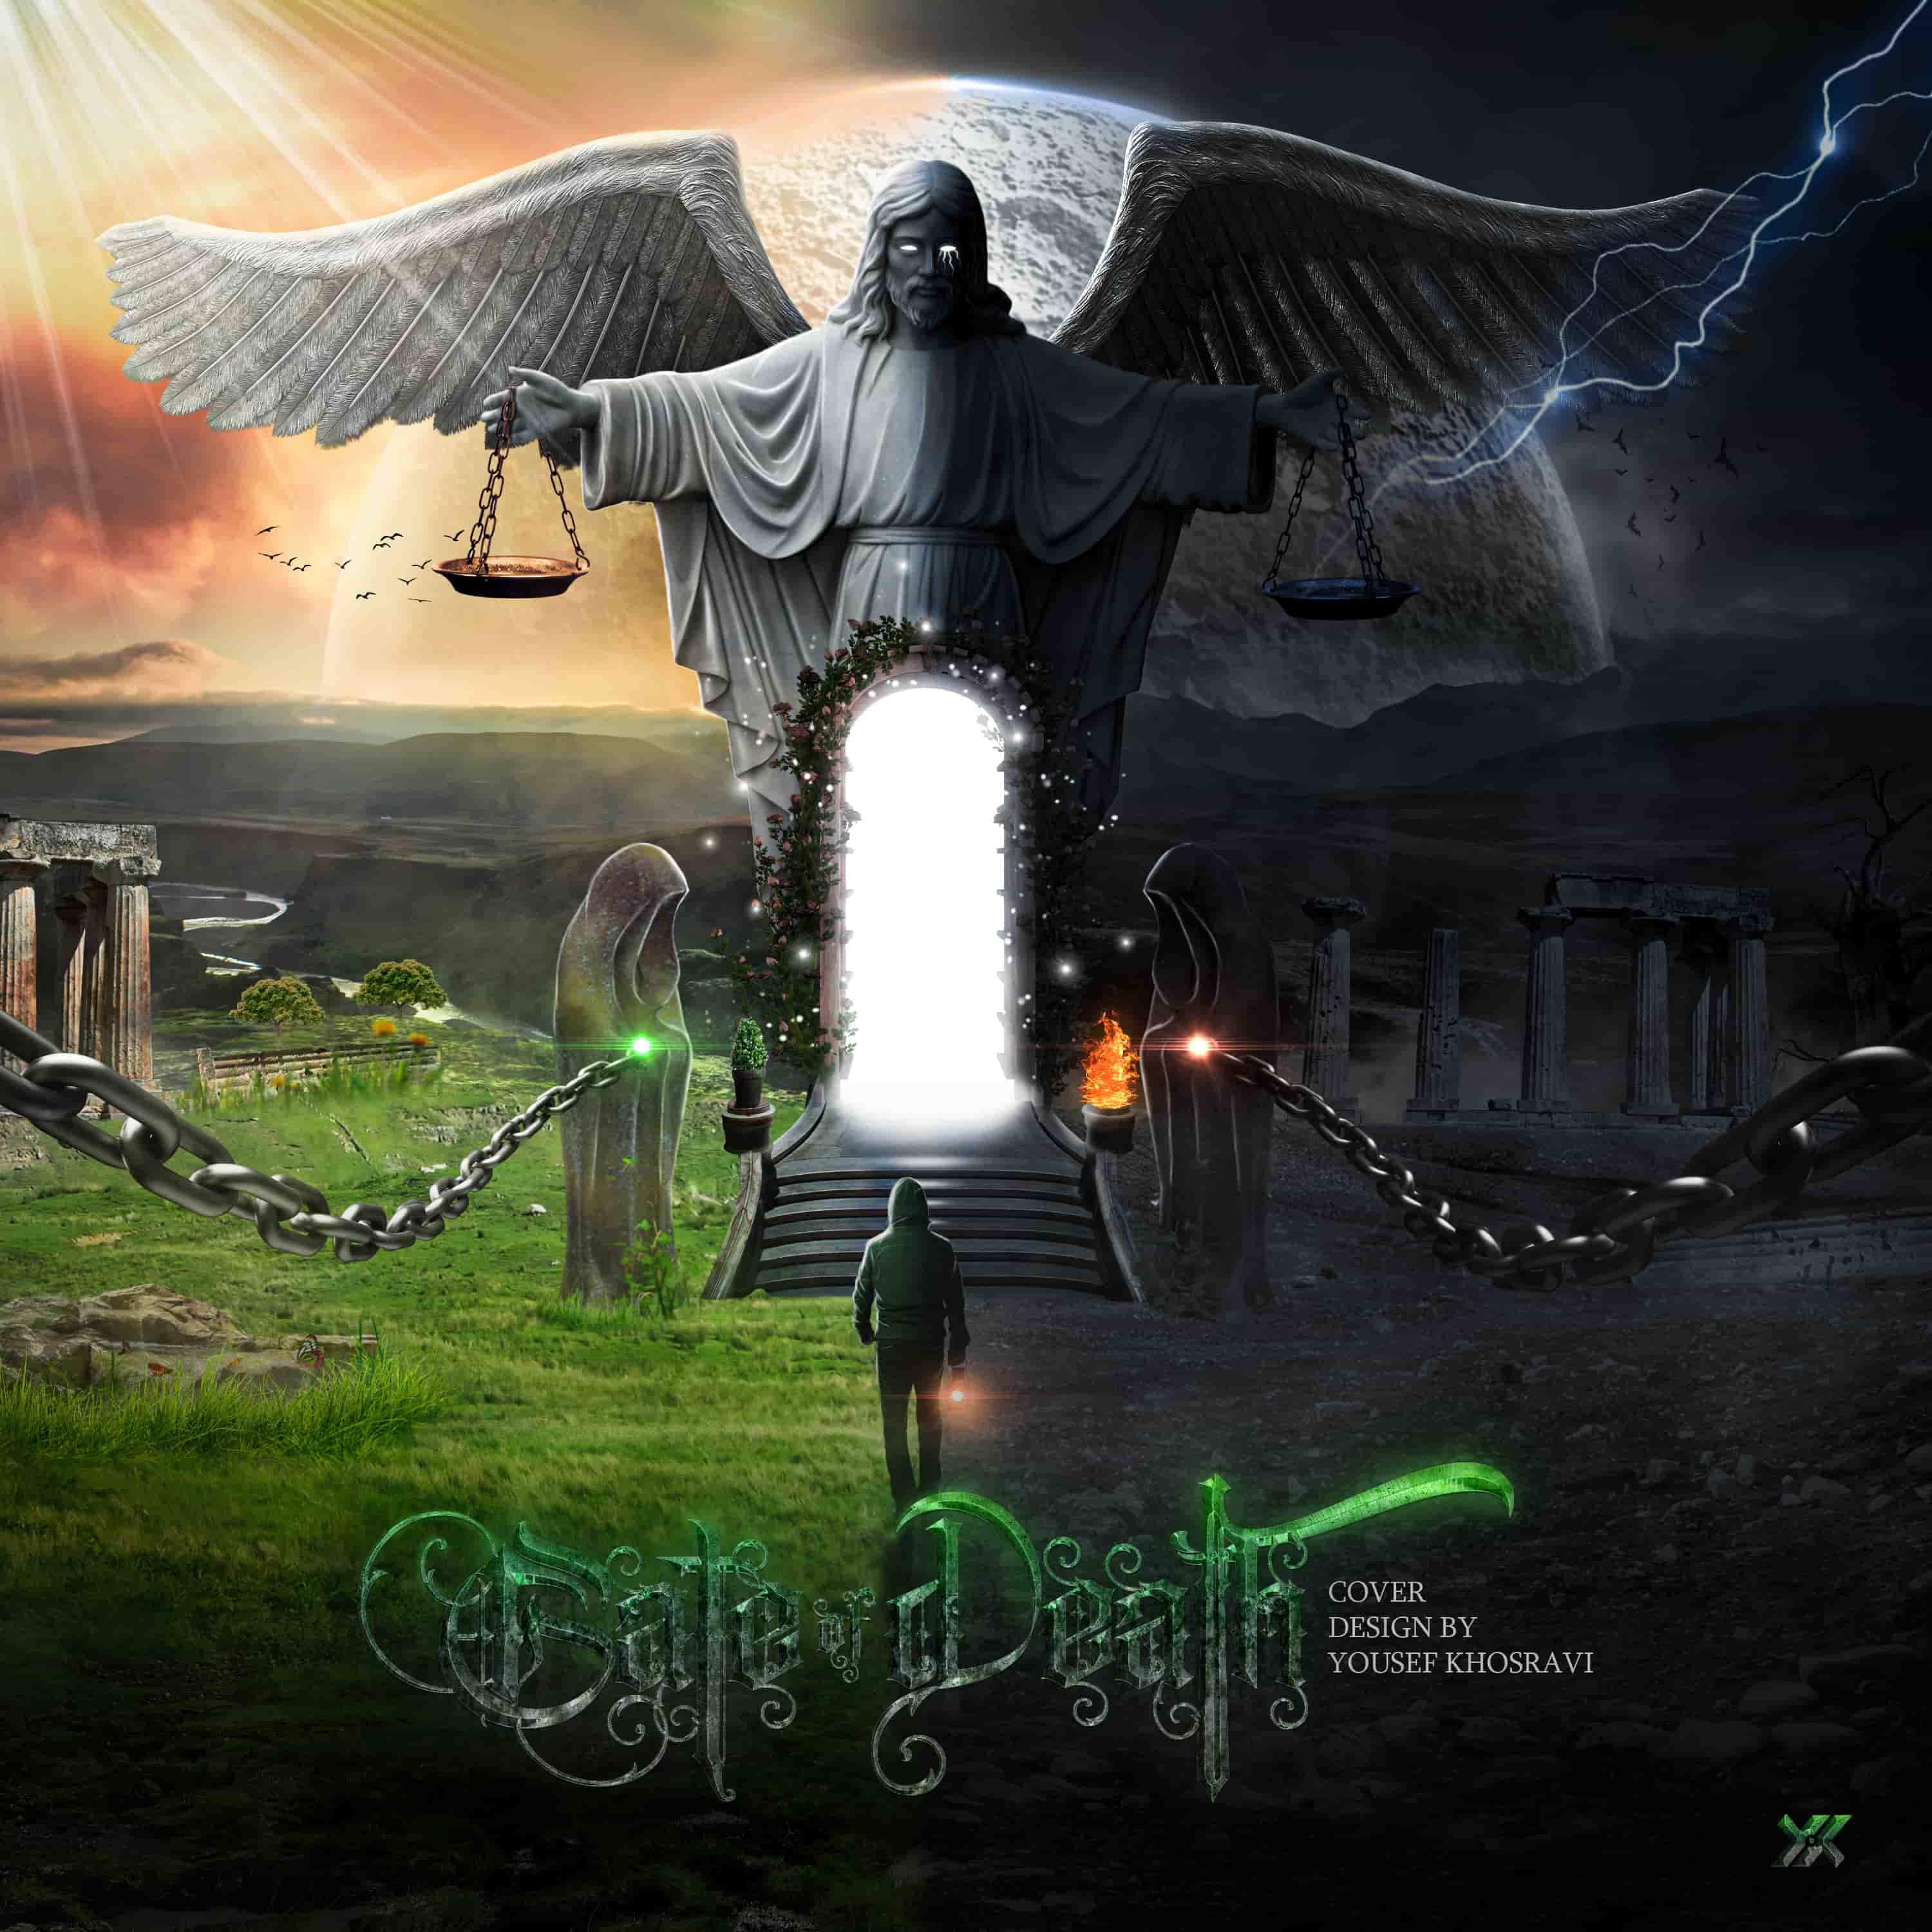 Photomontage The gate of death Design By @ikhosravy